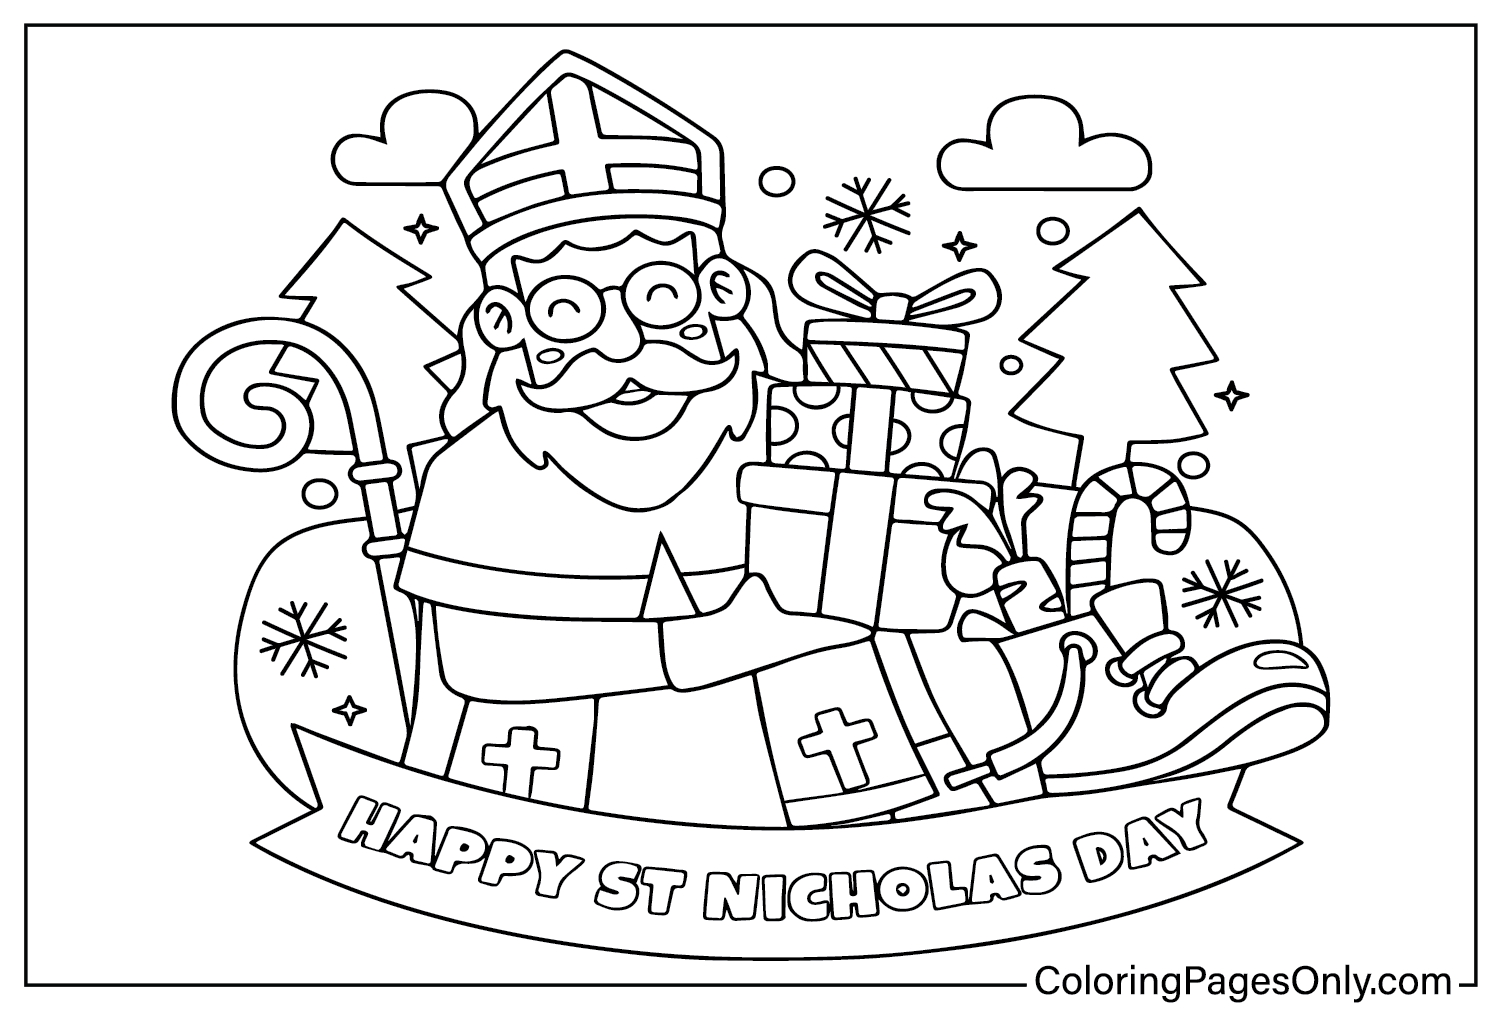 Saint Nicholas Day Coloring Page from Saint Nicholas Day